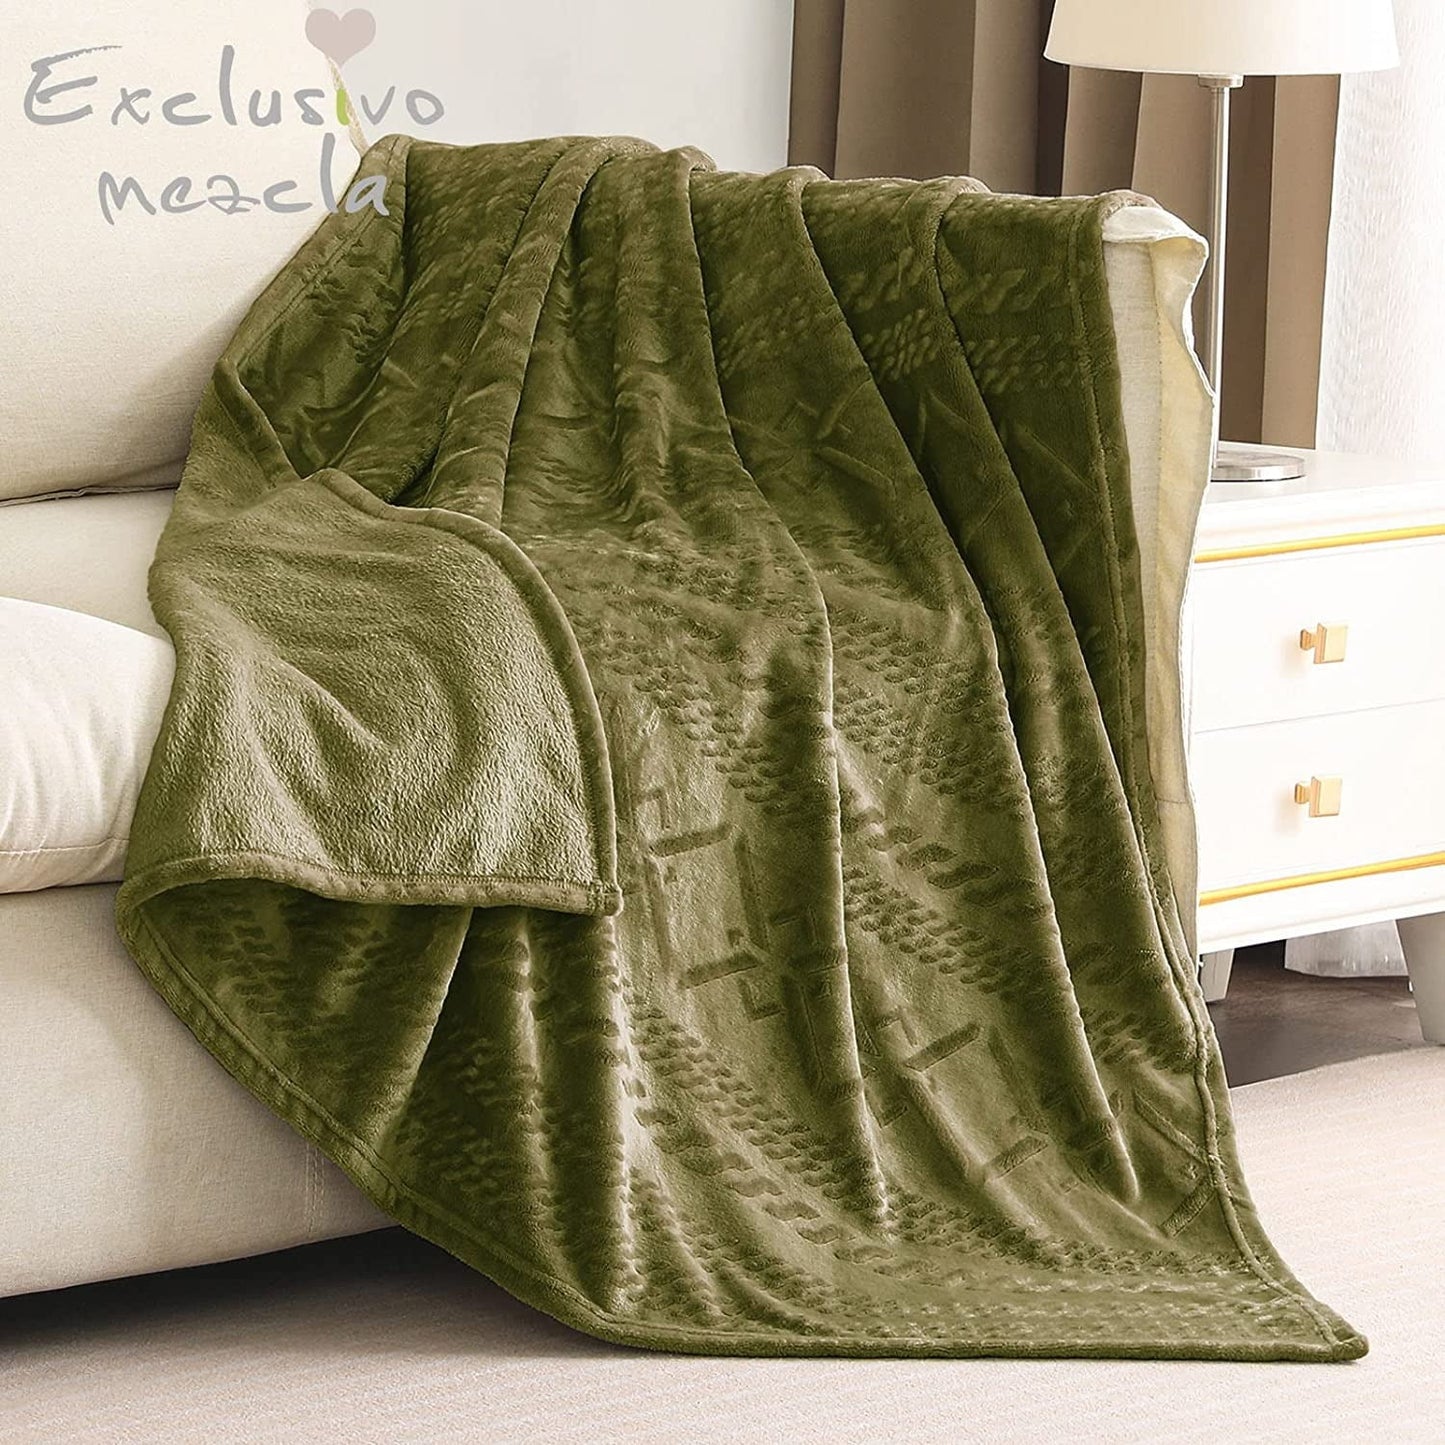 Exclusivo Mezcla Soft Throw Blanket, Large Fuzzy Fleece Blanket, Decorative Geometry Pattern Plush Throw Blanket for Couch/Sofa/Bed, 50x60 Inches, Green